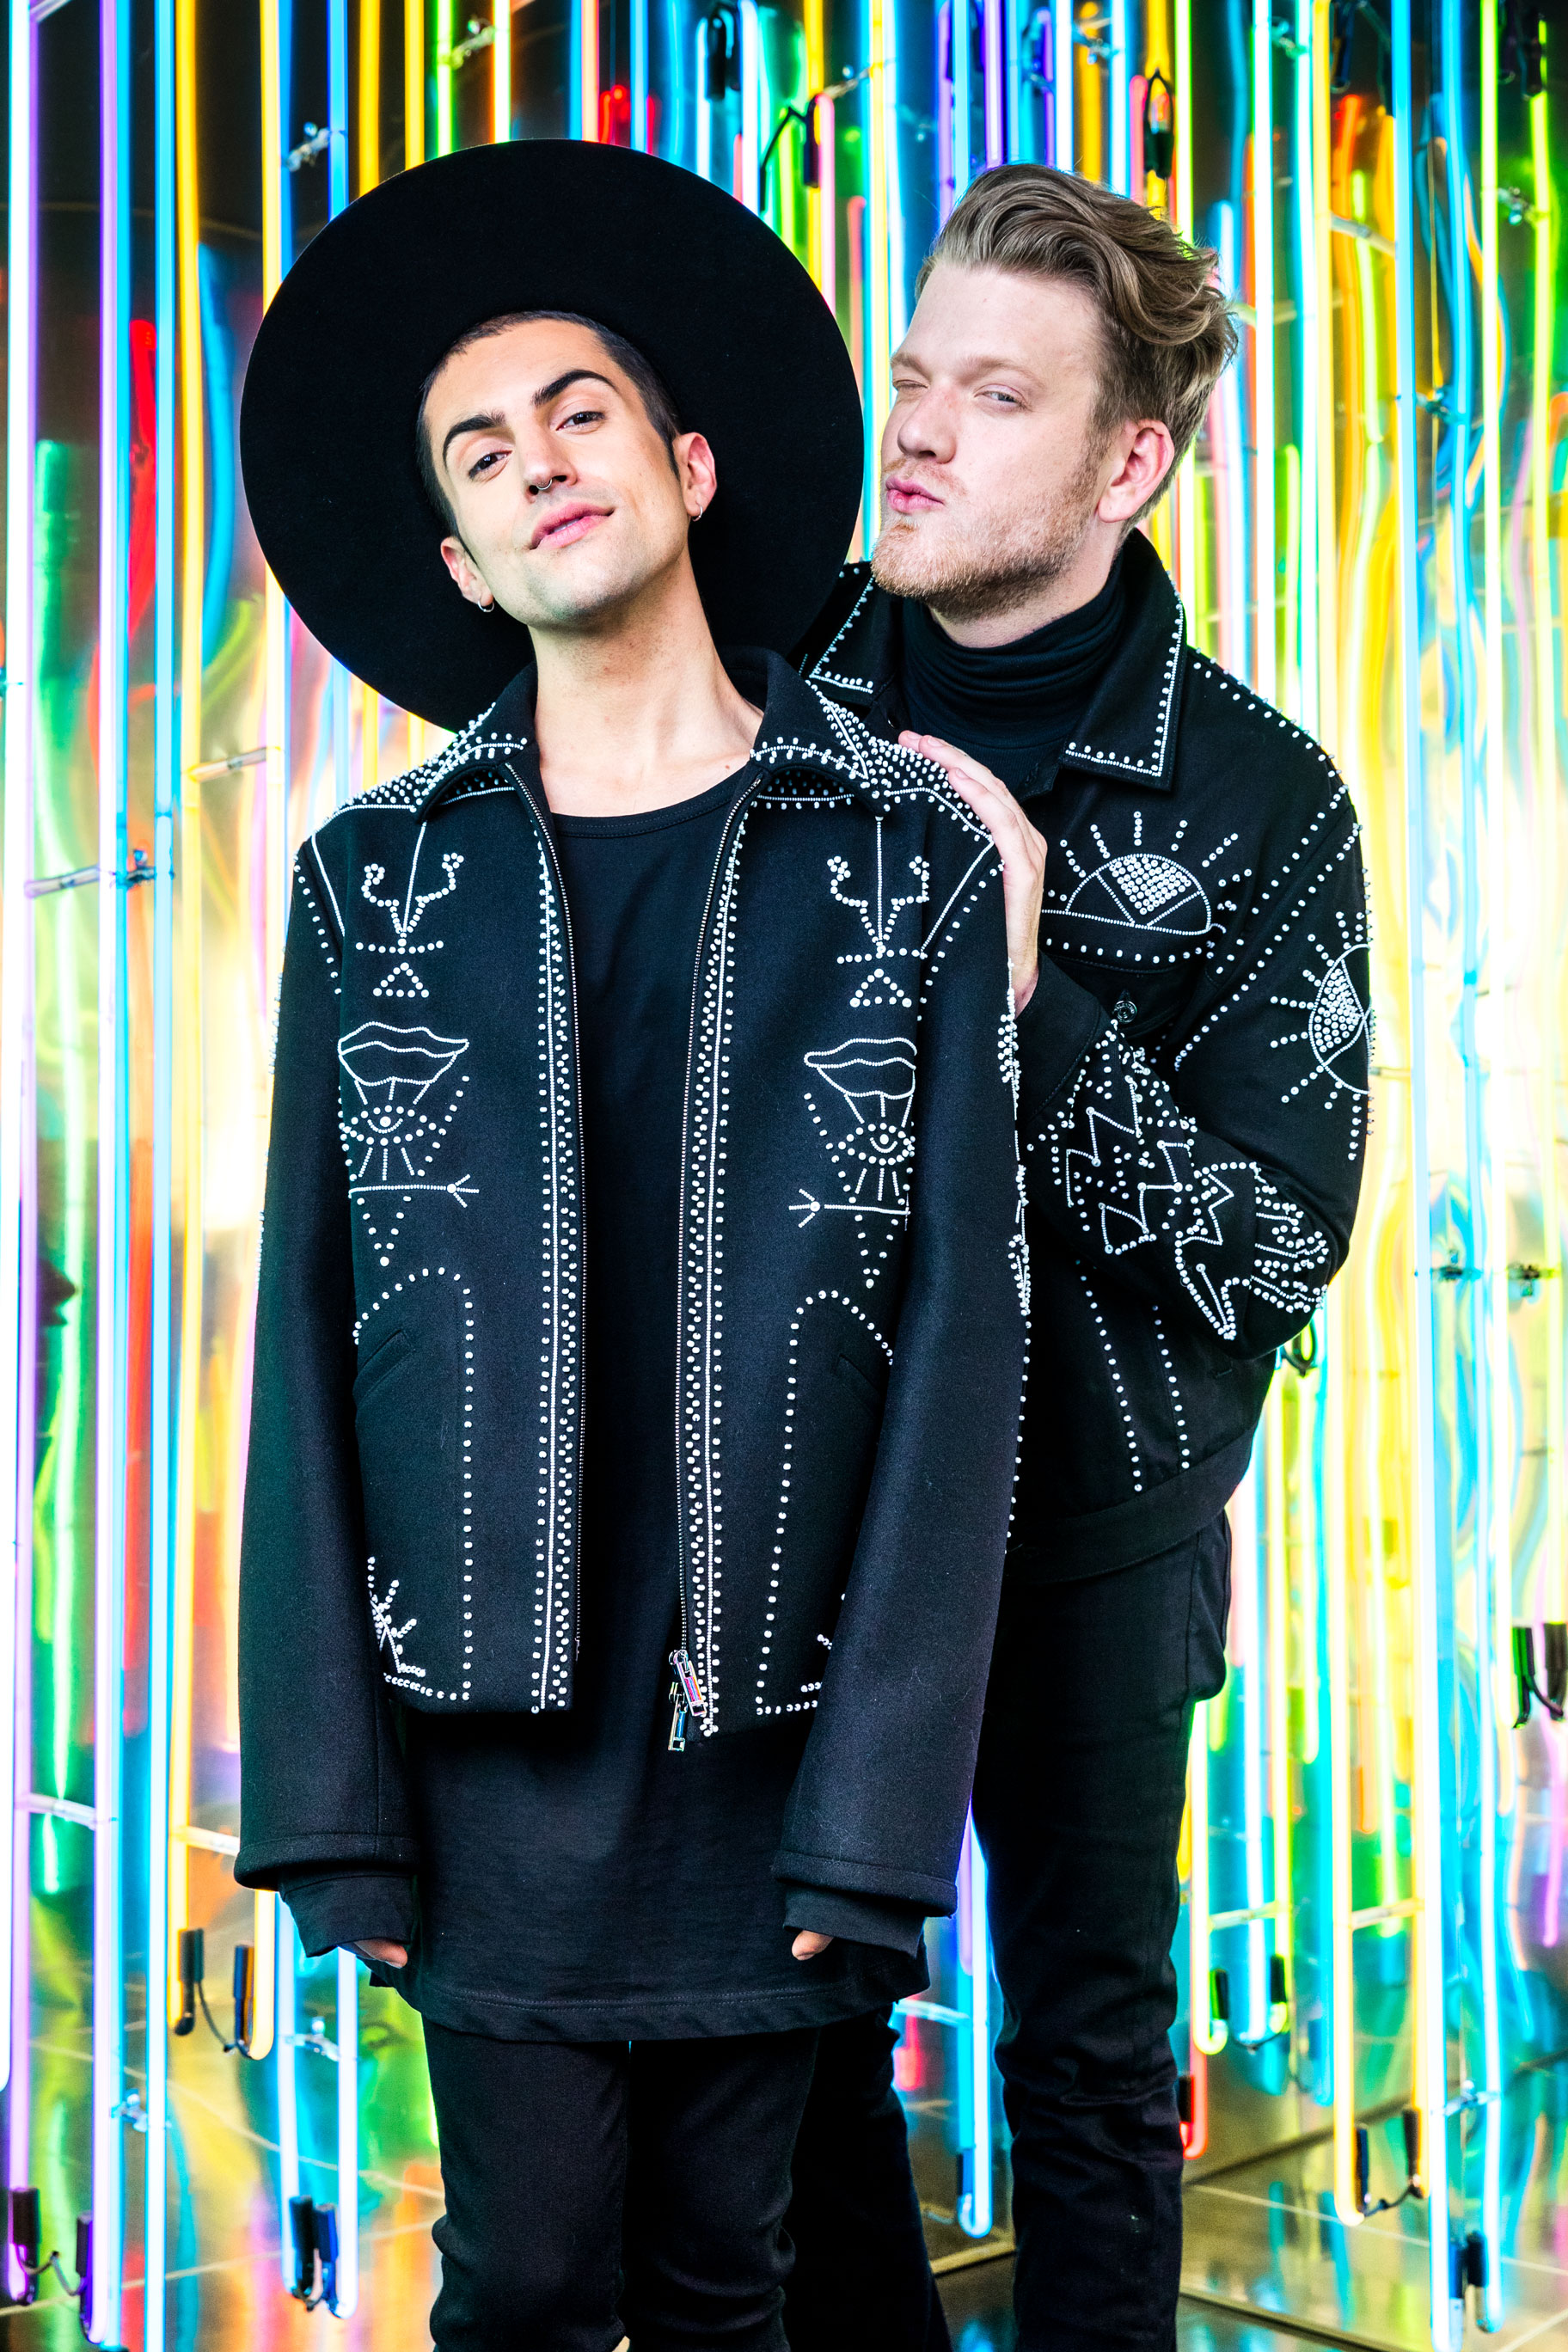 011_1468_sup3rfruit_Photos_by_marcroyce_v1